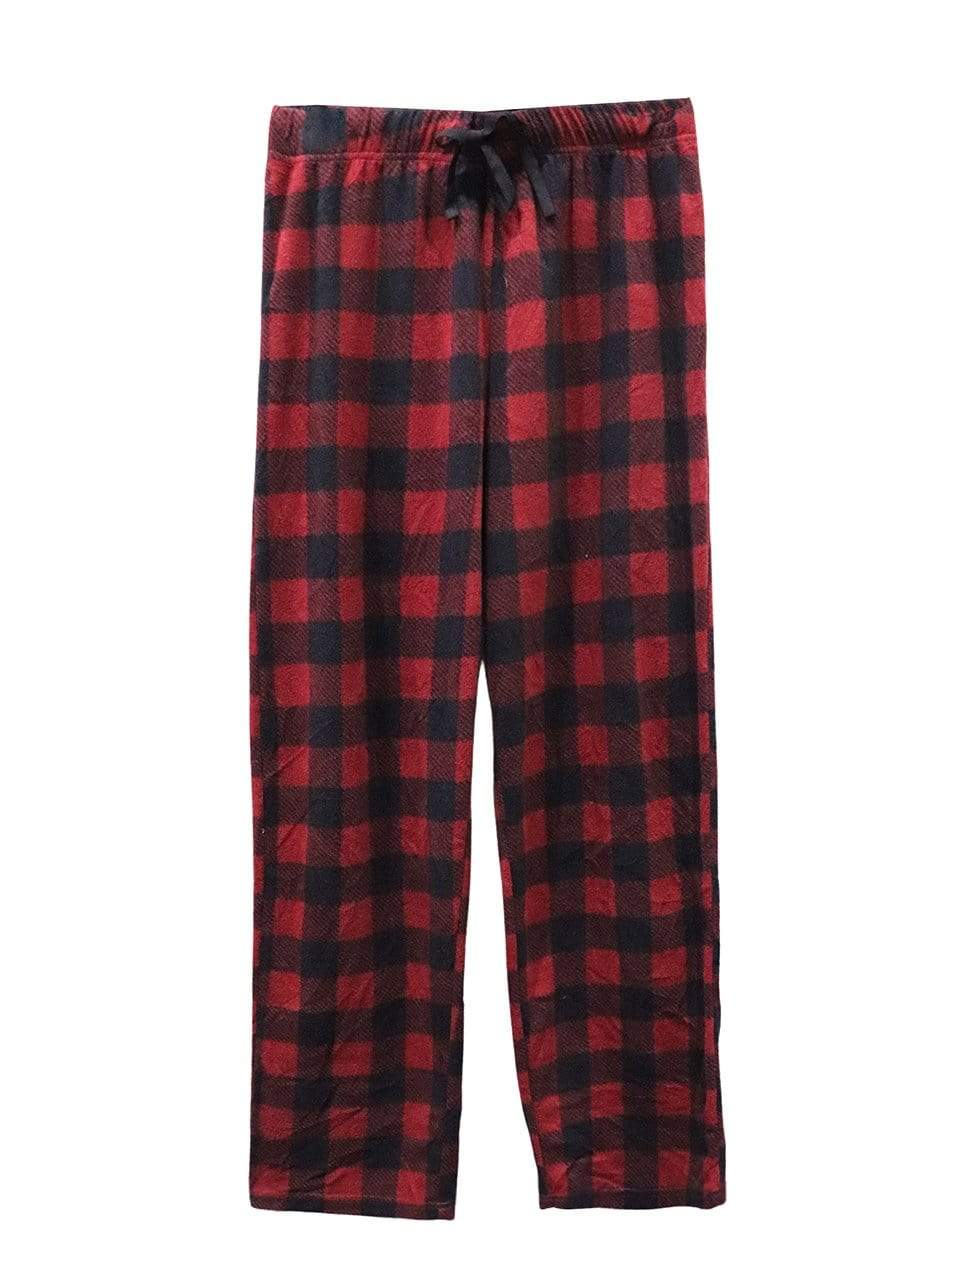 BRANDS & BEYOND Mens Bottoms S / Red-Black Woven Pajama Pant